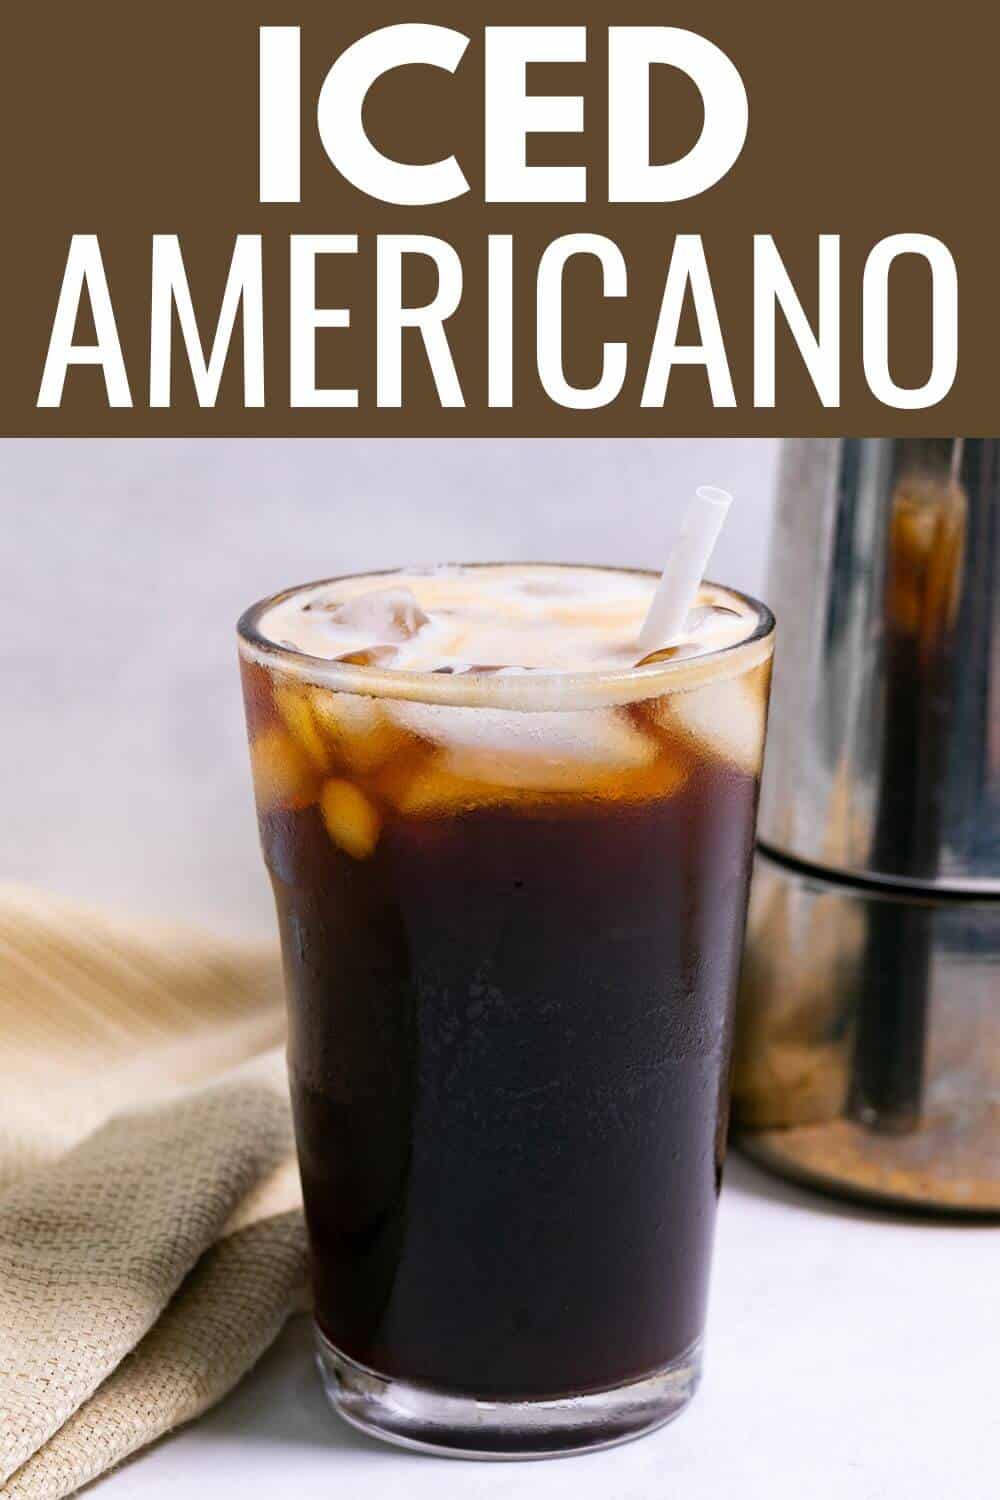 Iced Americano with recipe title text overlay.